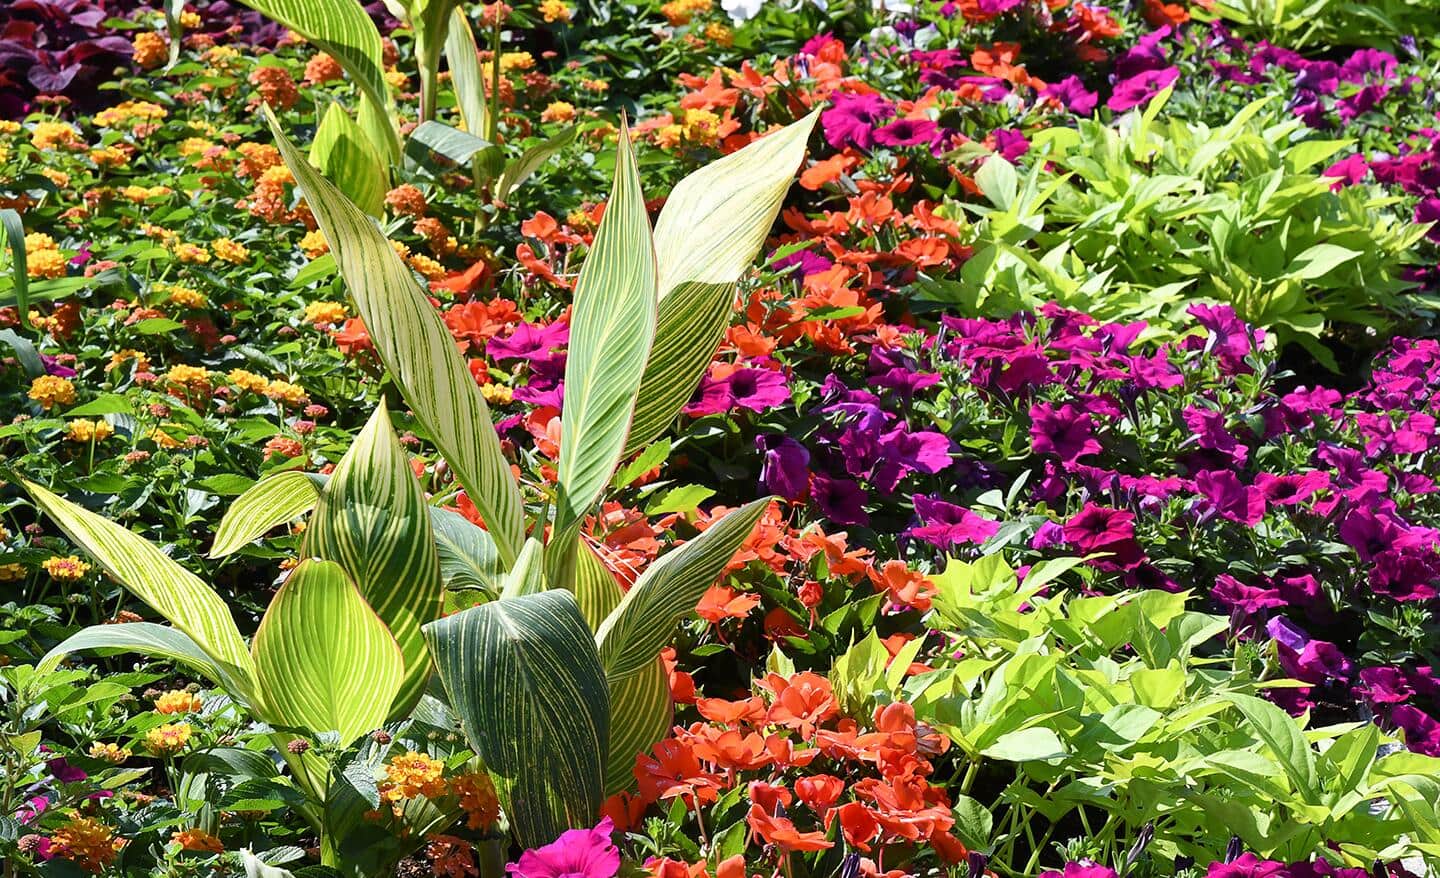 Cannas and more annual and perennial blooms in a garden display